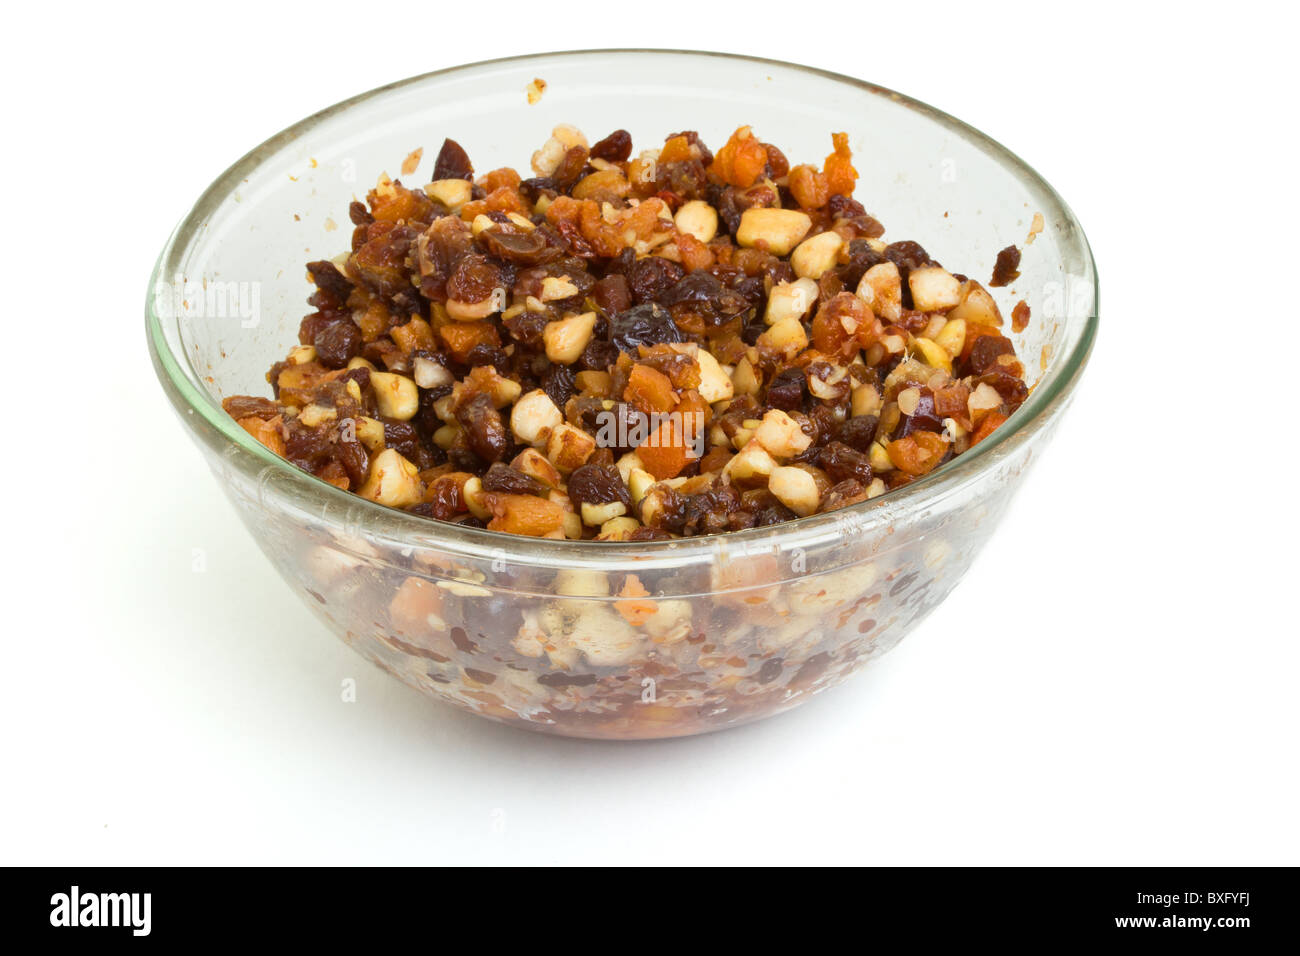 Glass bowl Xmas Cake Mix of nuts and soft fruits soaking up added rum, brandy and sherry. Stock Photo